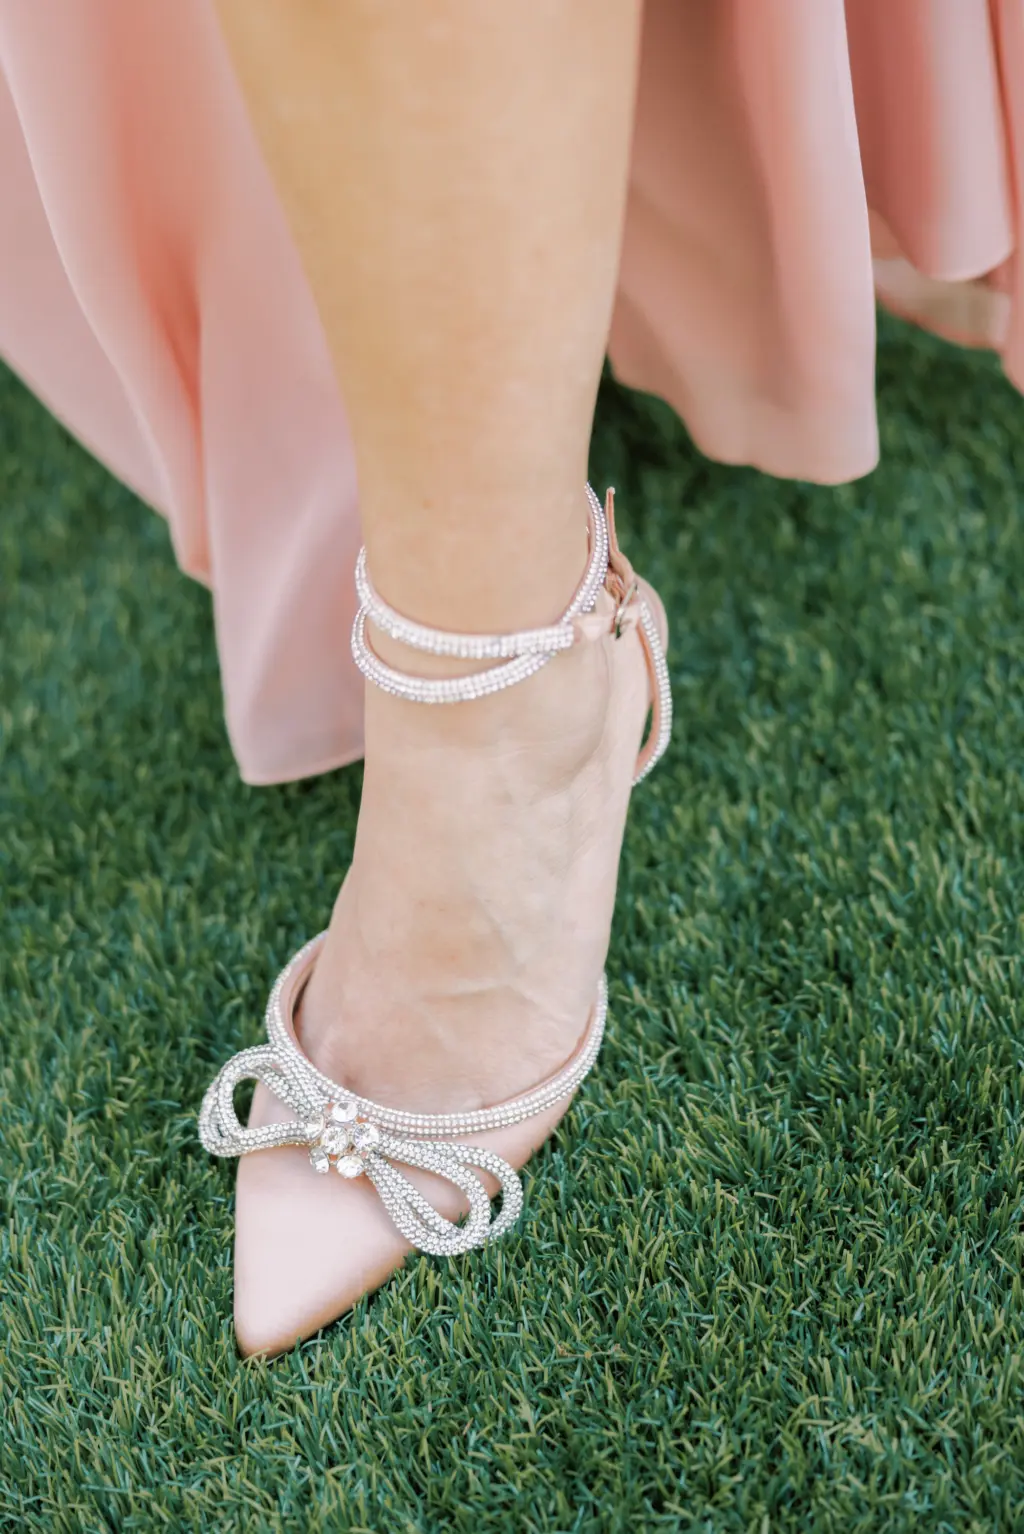 Pointed Toe With Crystal Bow and Strap Bridesmaids Wedding Shoe Inspiration